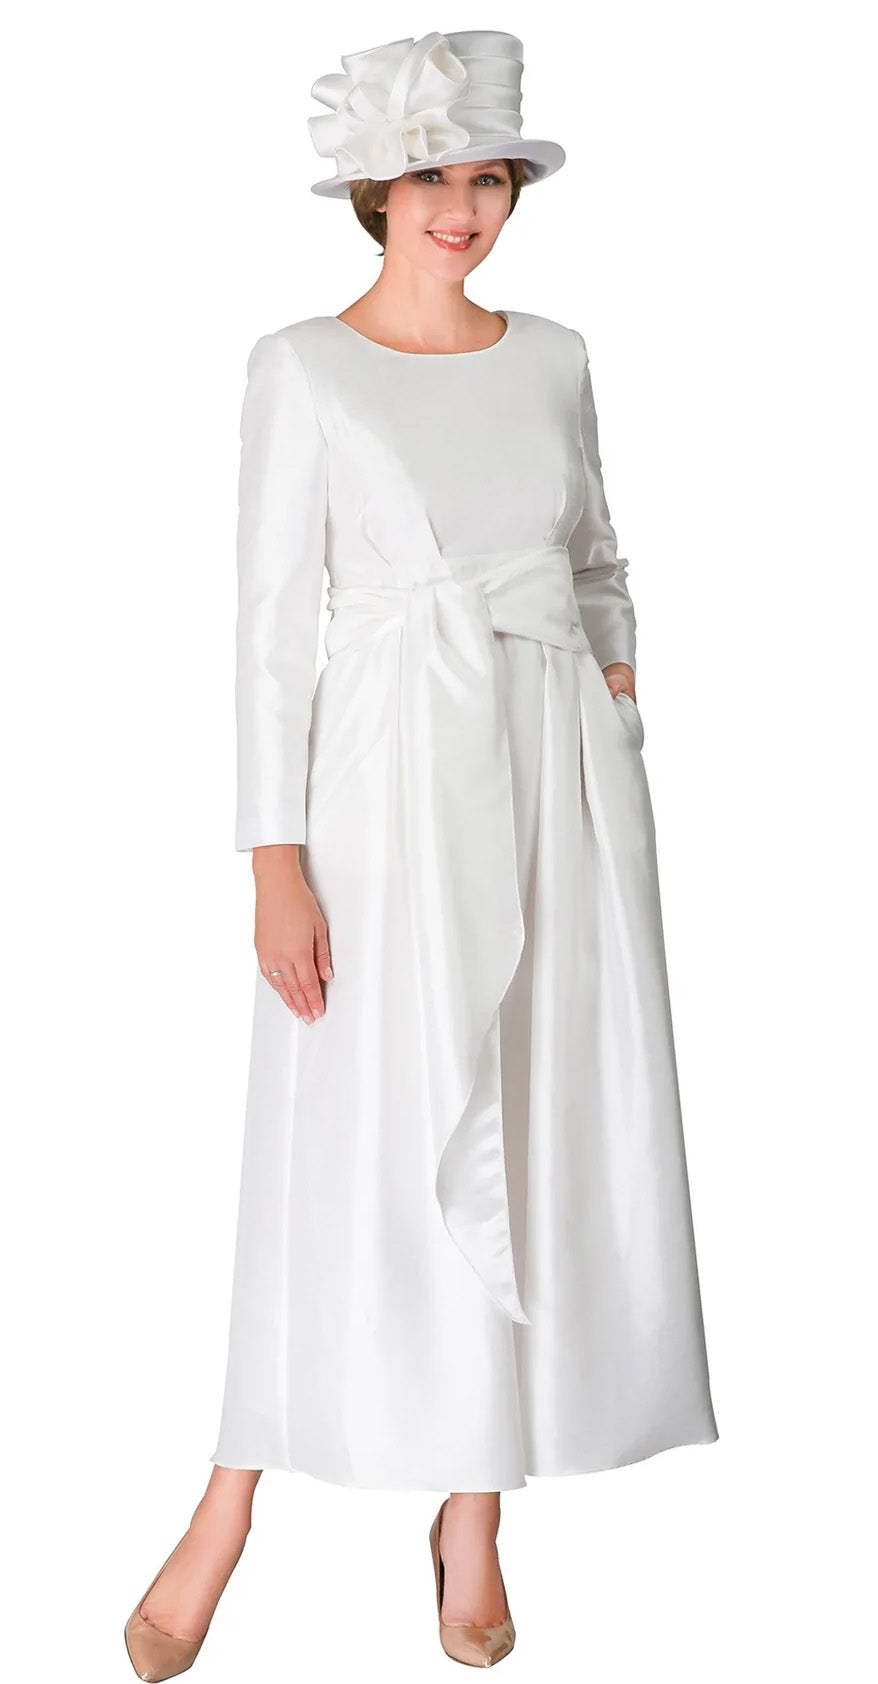 Giovanna Dress D1508C-White - Church Suits For Less